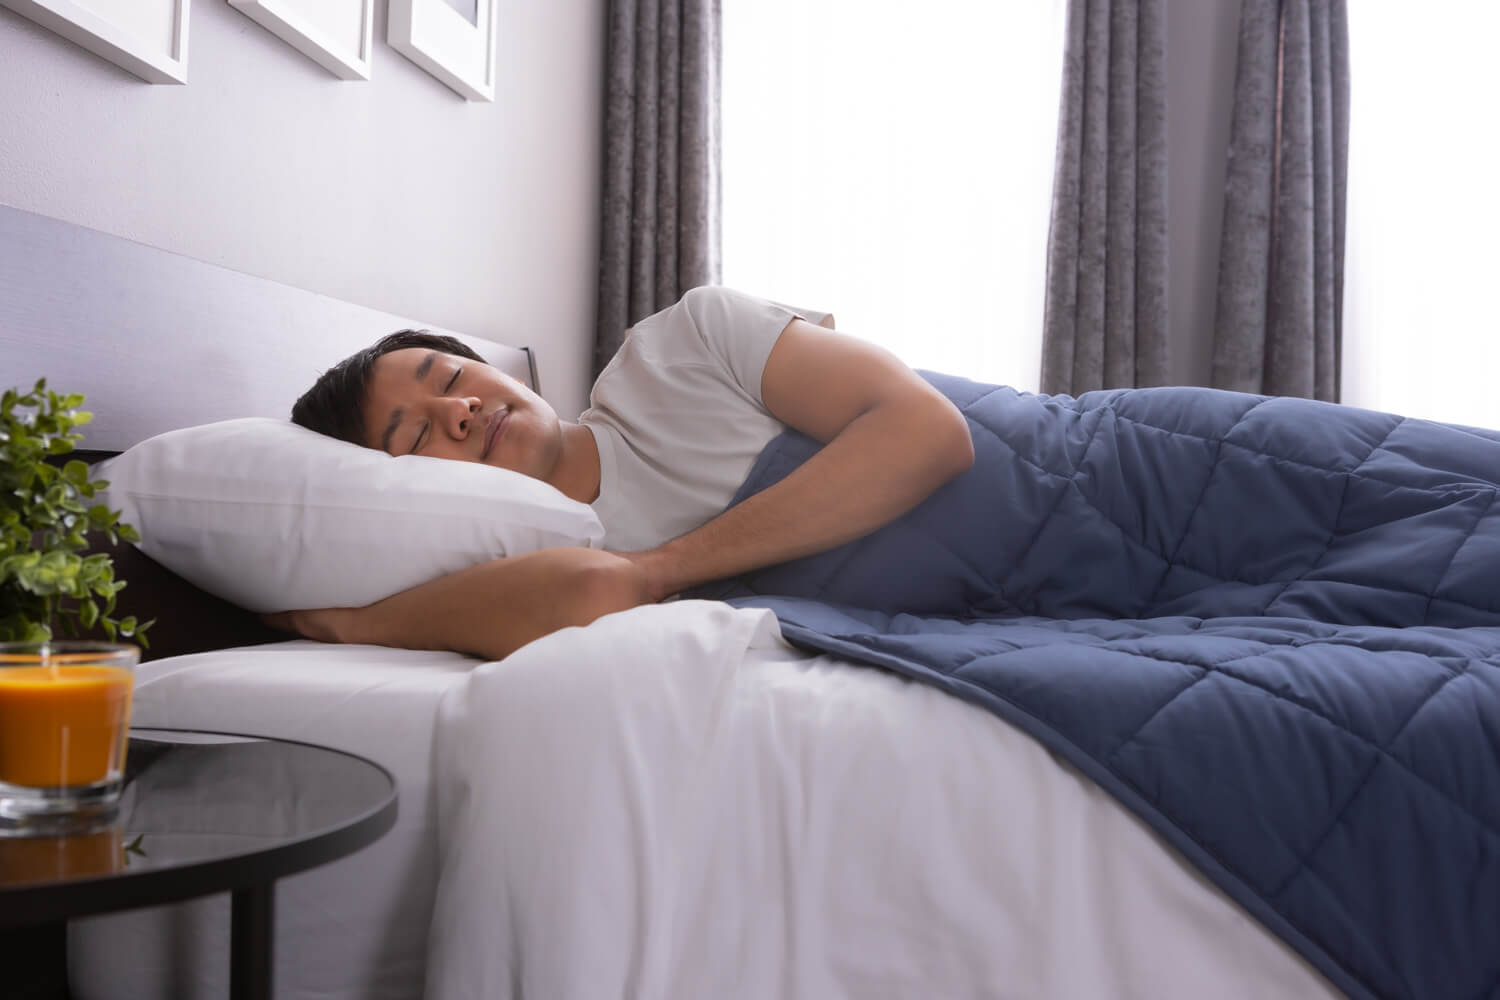 Man peacefully resting in bed, with Classic Weighted Blanket spread across his body 